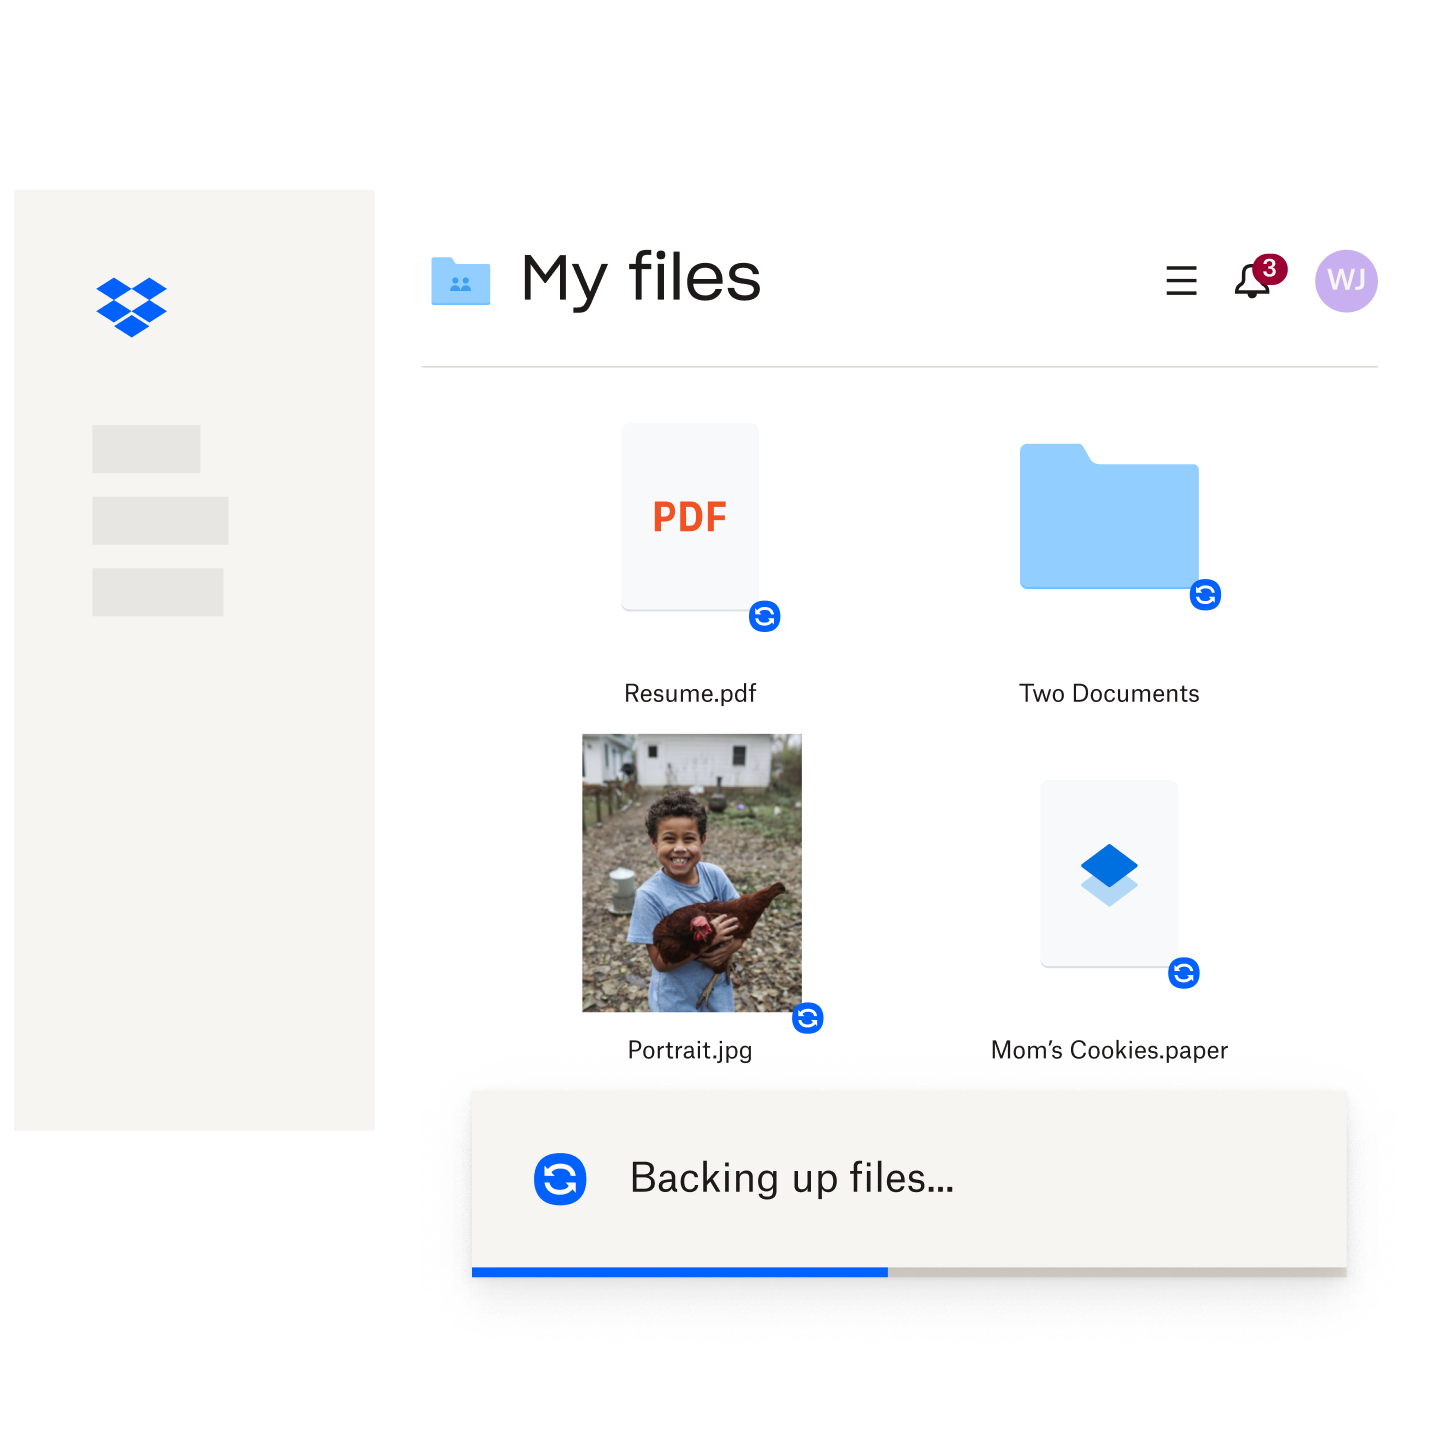 A dialogue box showing the progress of different types of files in Dropbox being backed up